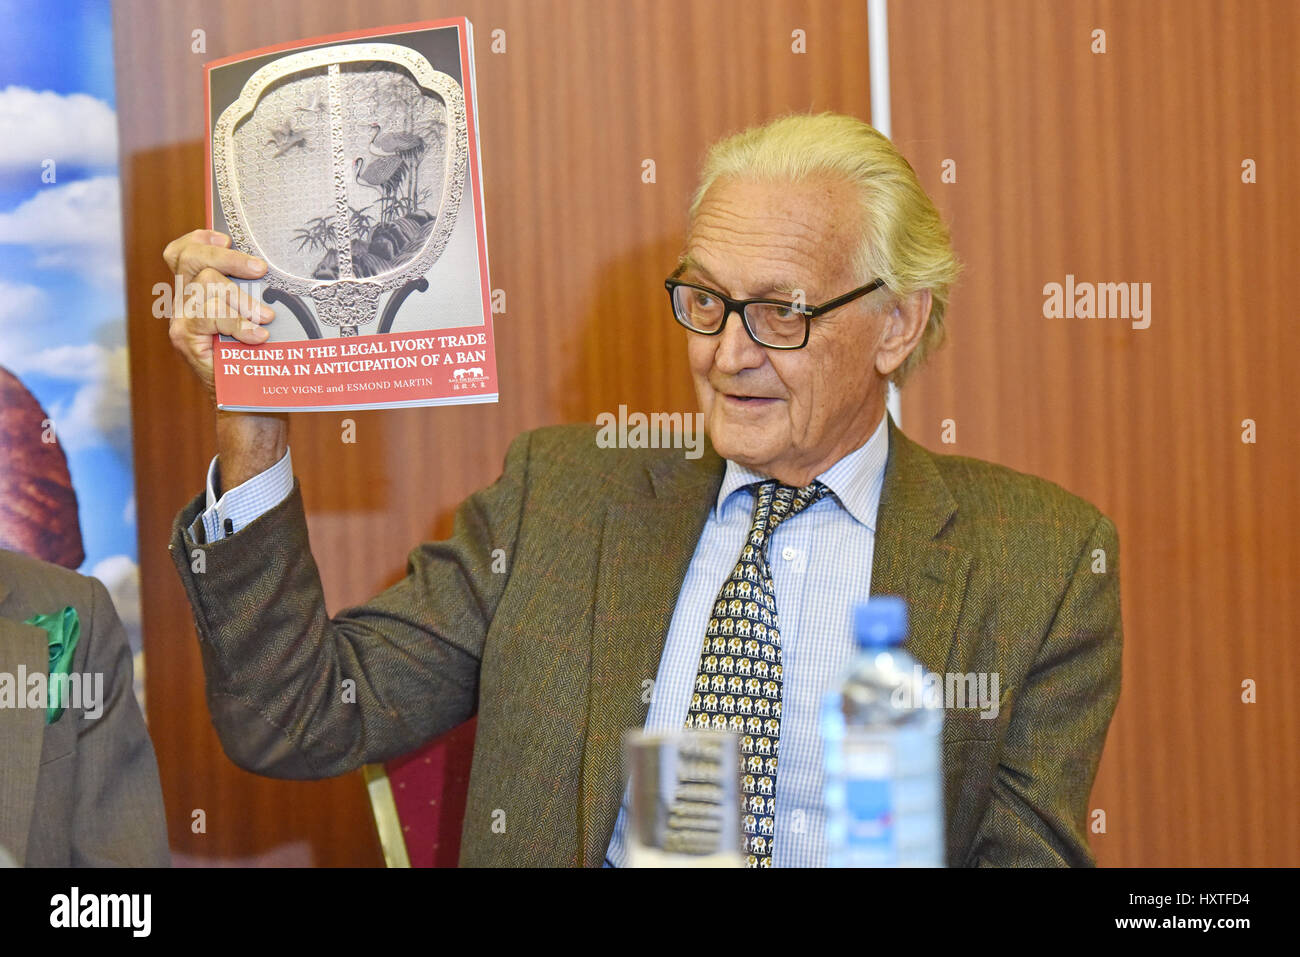 (170331)--NAIROBI, March 31, 2017(Xinhua)-- Iain Douglas Hamilton, Founder of Save the Elephants, a conservation organization, displays a report on China's legal ivory trade in Nairobi, Kenya, March 29, 2017. The historic ban on processing and sale of ivory products announced by China on December 31, 2016 could herald demise of elephant poaching in Africa, says a new report by a conservation lobby released in Nairobi on Wednesday. (Xinhua/Sun Ruibo) Stock Photo